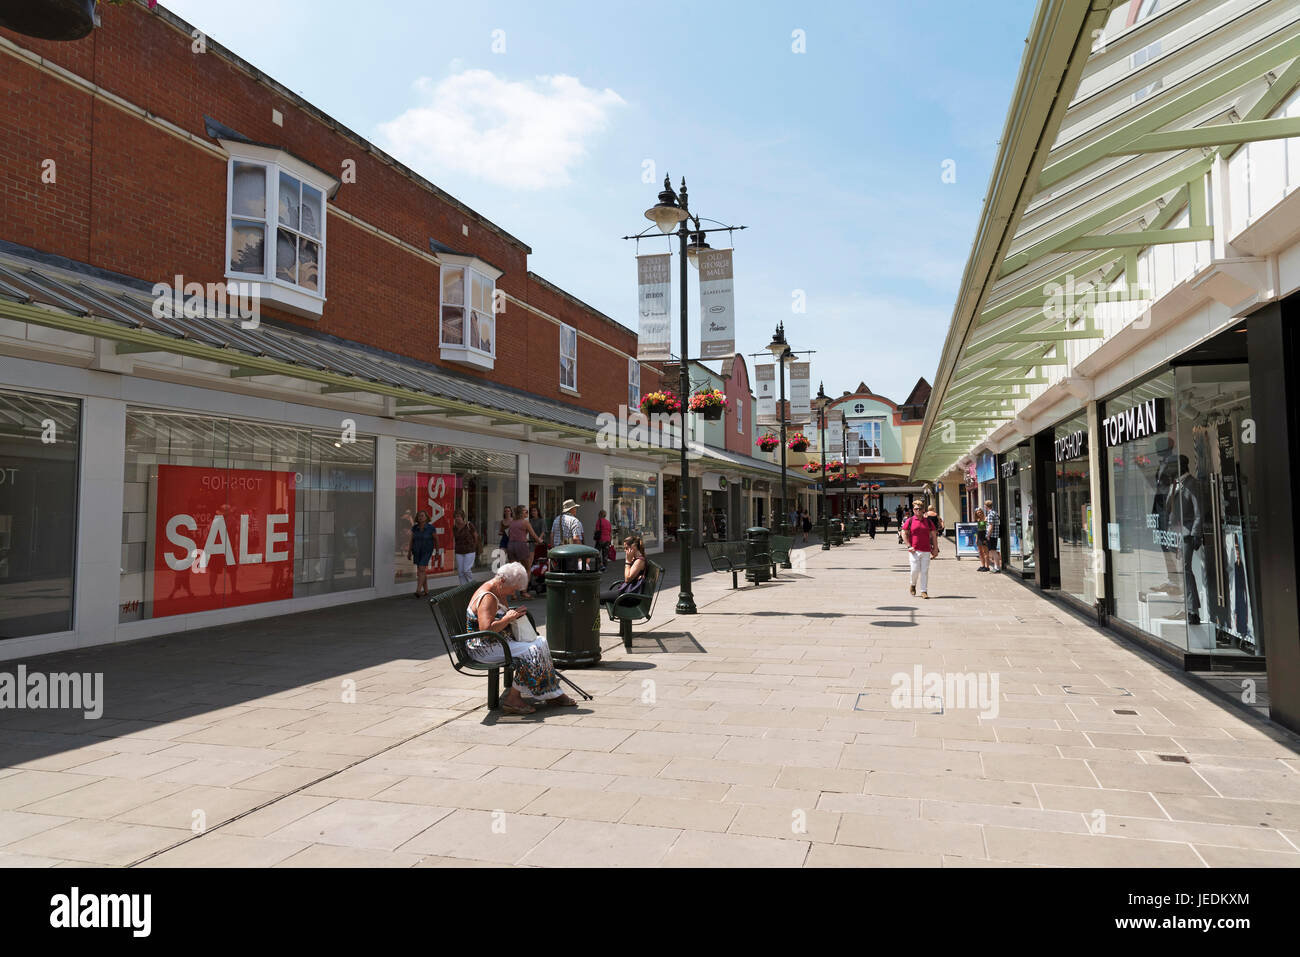 The Old George Mall a shopping precinct in Salisbury Wiltshire England UK. June 2017 Stock Photo